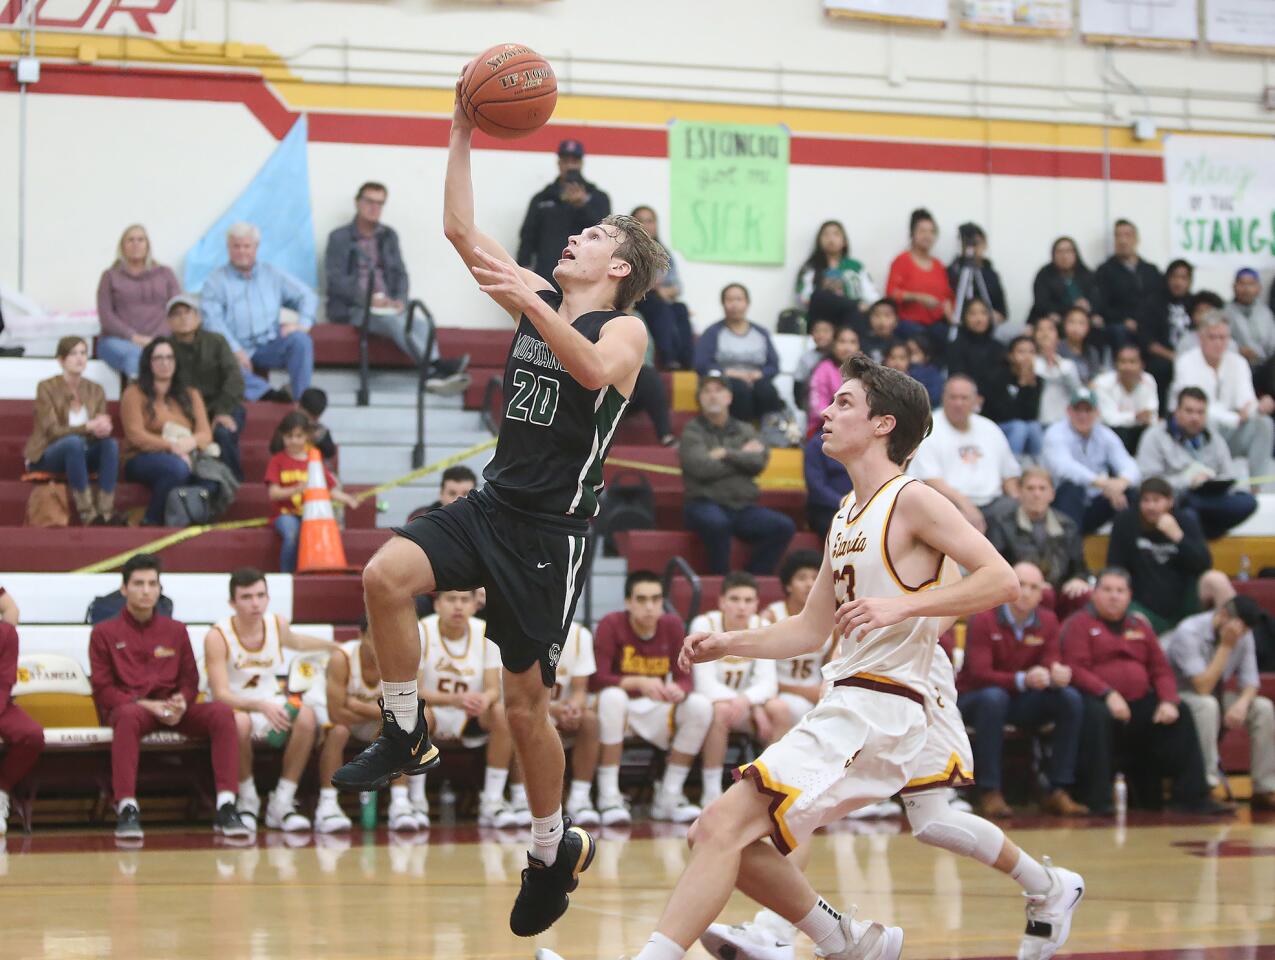 Costa Mesa High's Osman Hefner (20) drives in for a layup as Estancia's Jake Covey watches during an Orange Coast League boys' basketball game on Wednesday.